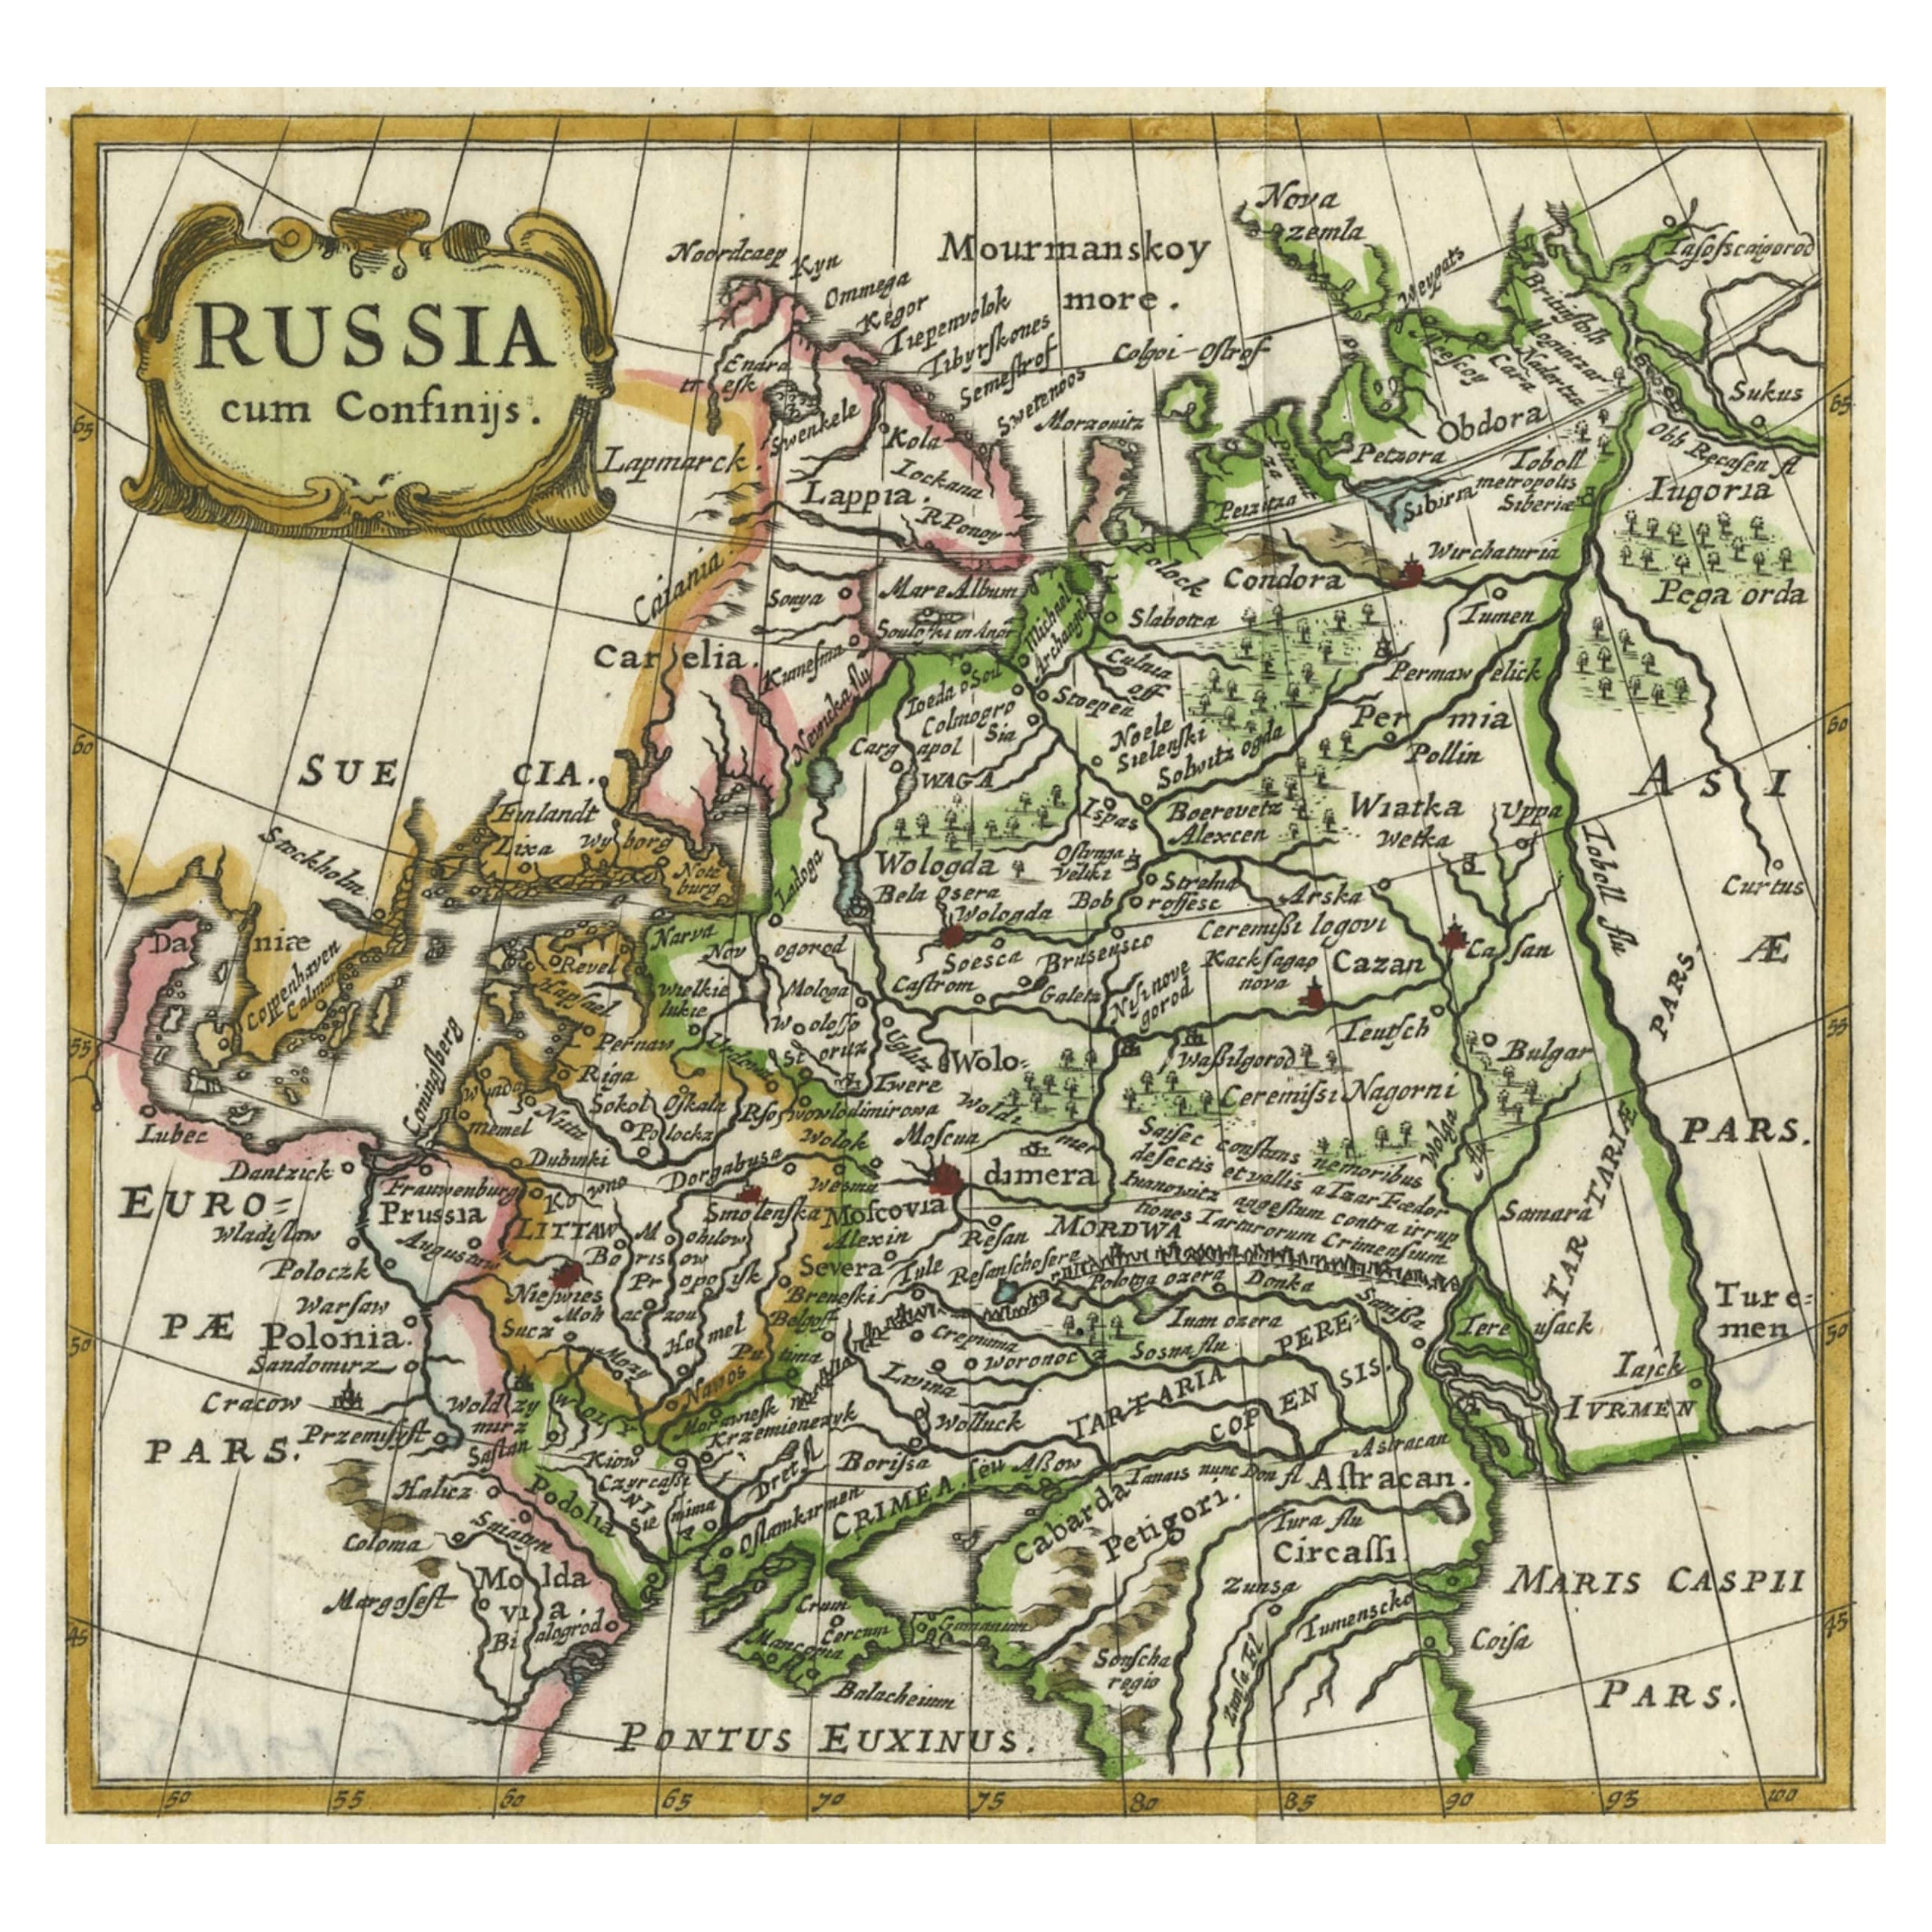 Charming Decorative Miniature Map of Russia, from an Old Pocket Atlas, 1685